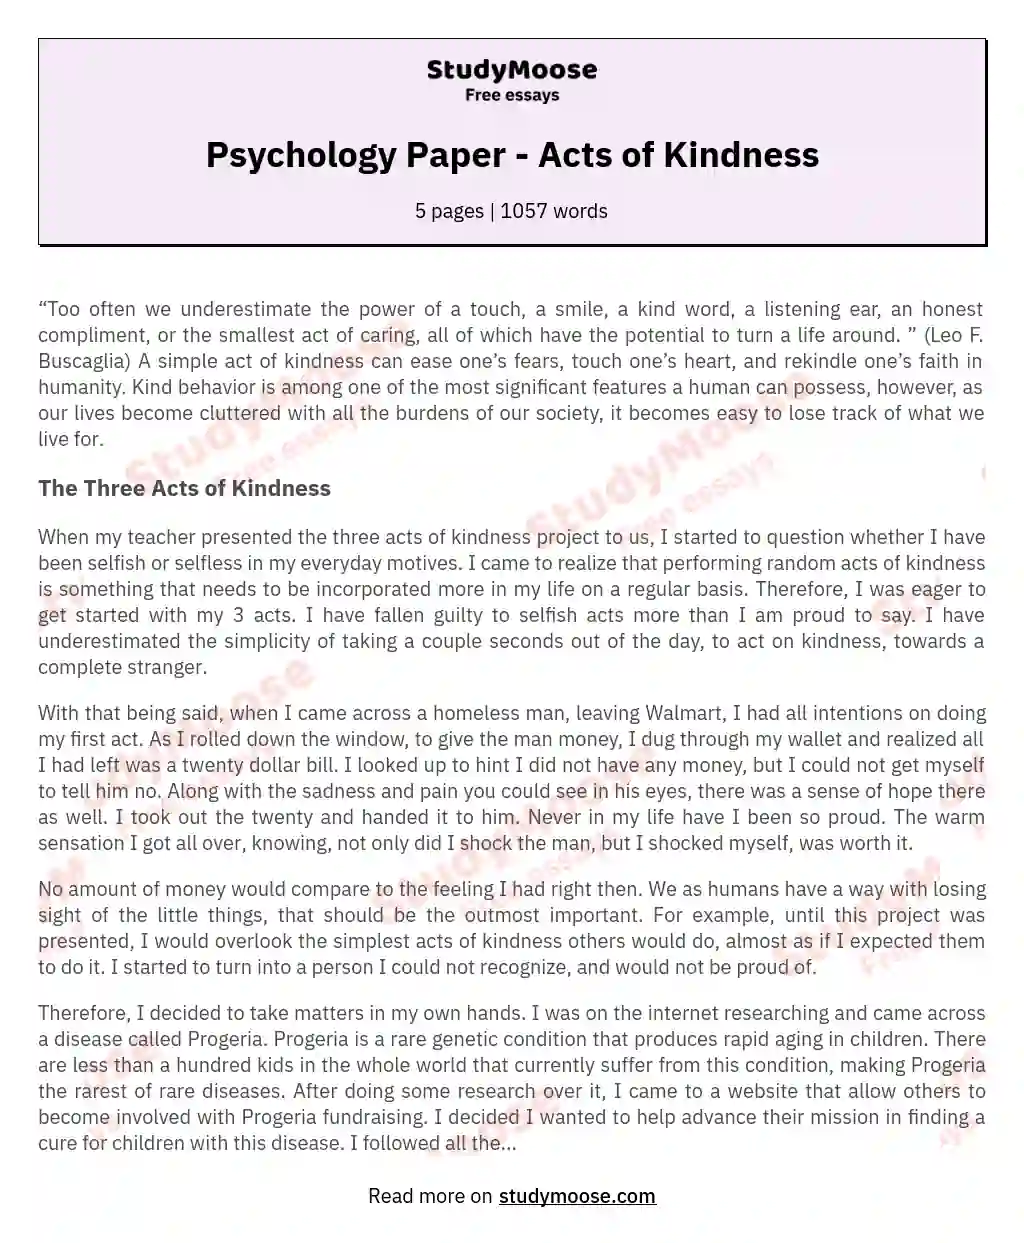 Psychology Paper - Acts of Kindness essay